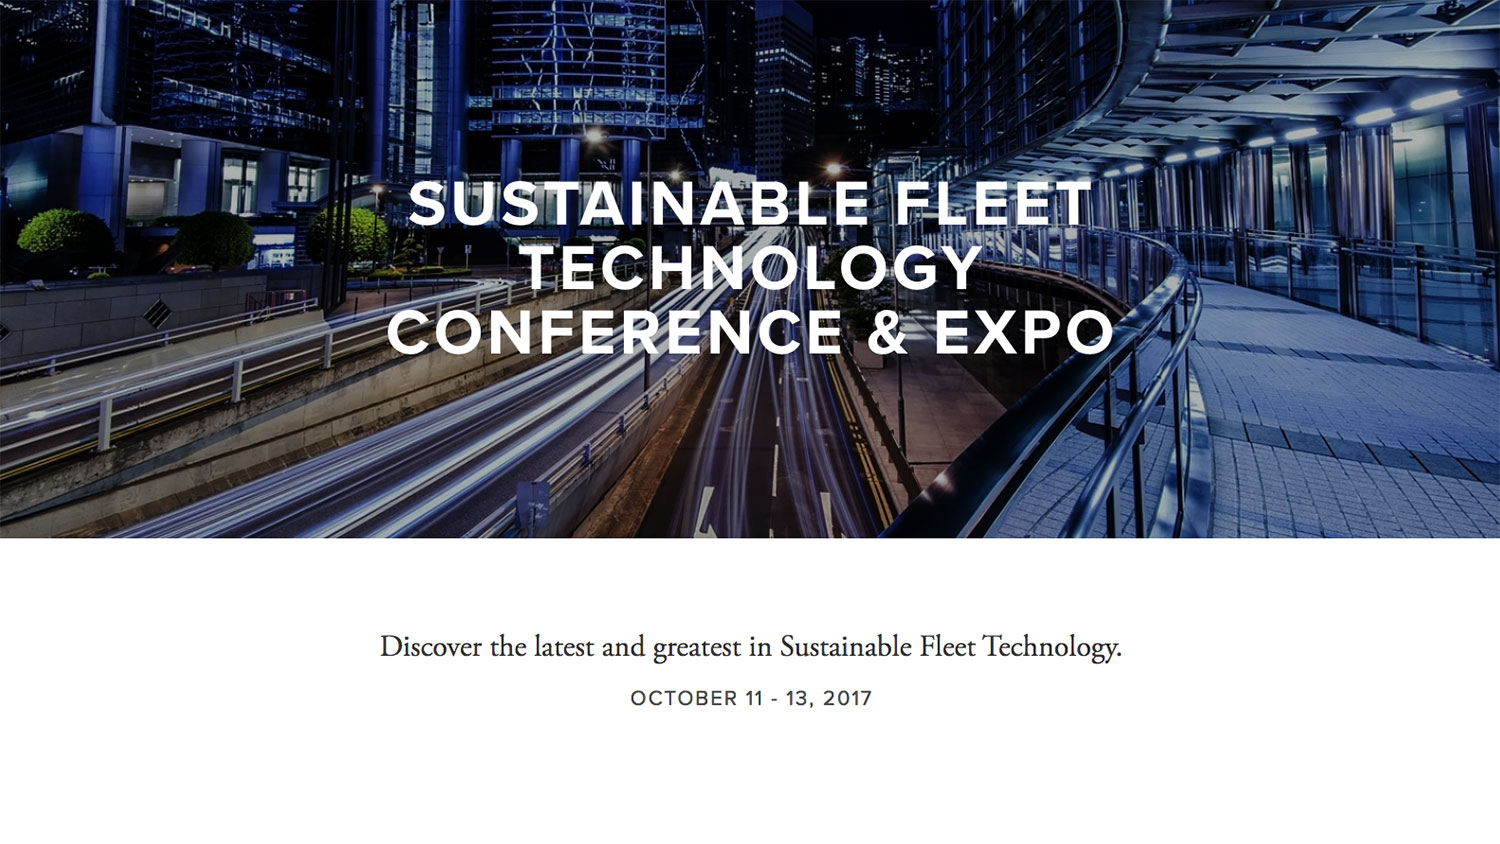 Sustainable Fleet Technology Conference and Expo; Discover the latest and greatest in Sustainable Fleet Technology; OCTOBER 11 - 13, 2017